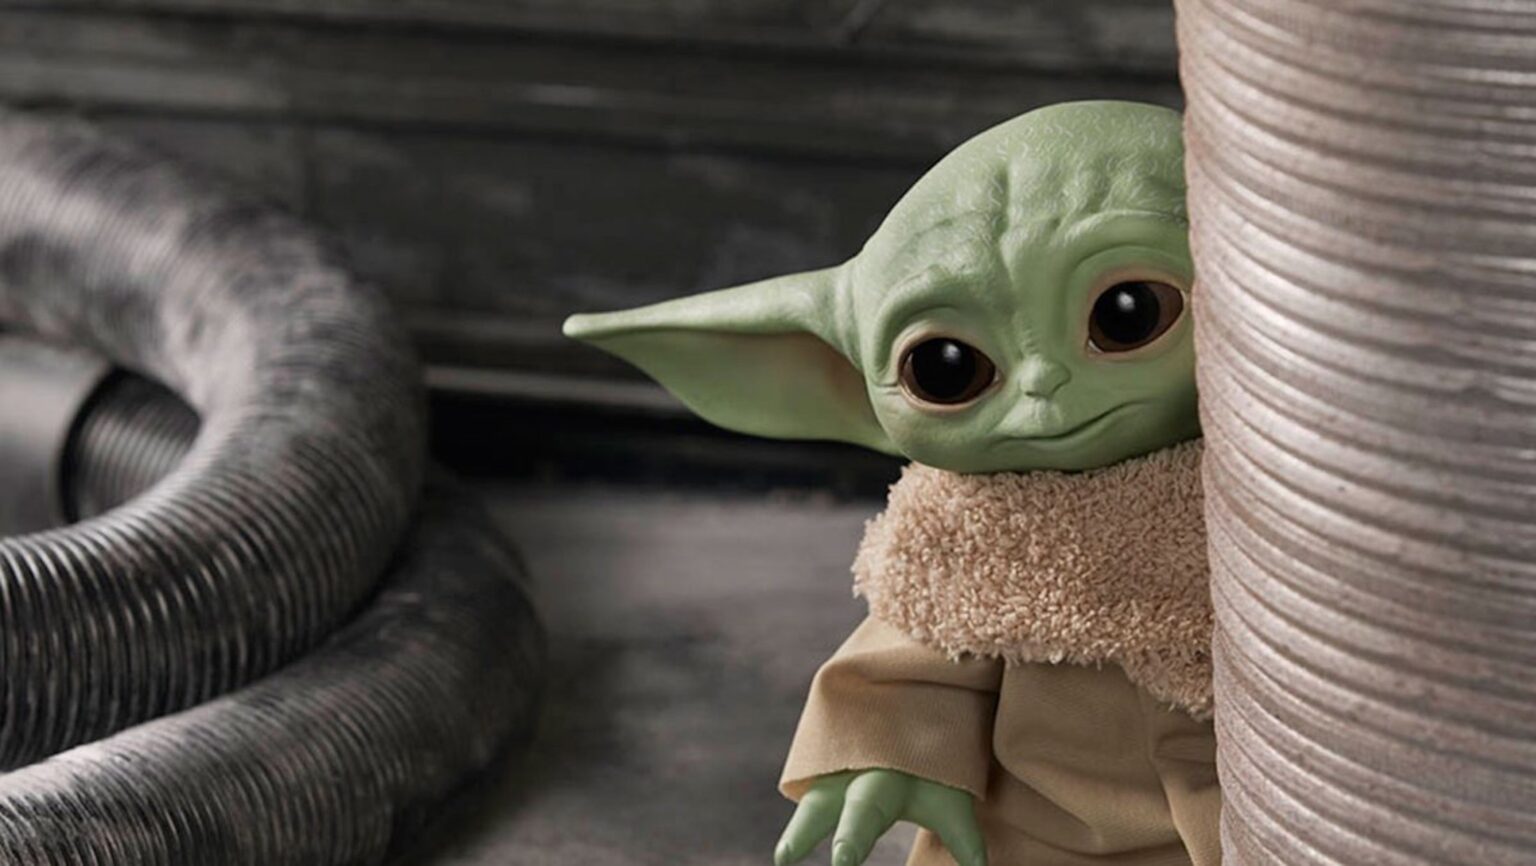 We’ve sifted through the vast ocean of Baby Yoda memes to present you the glittering gems. Here are some sweet Baby Yoda memes bound to charm your soul.